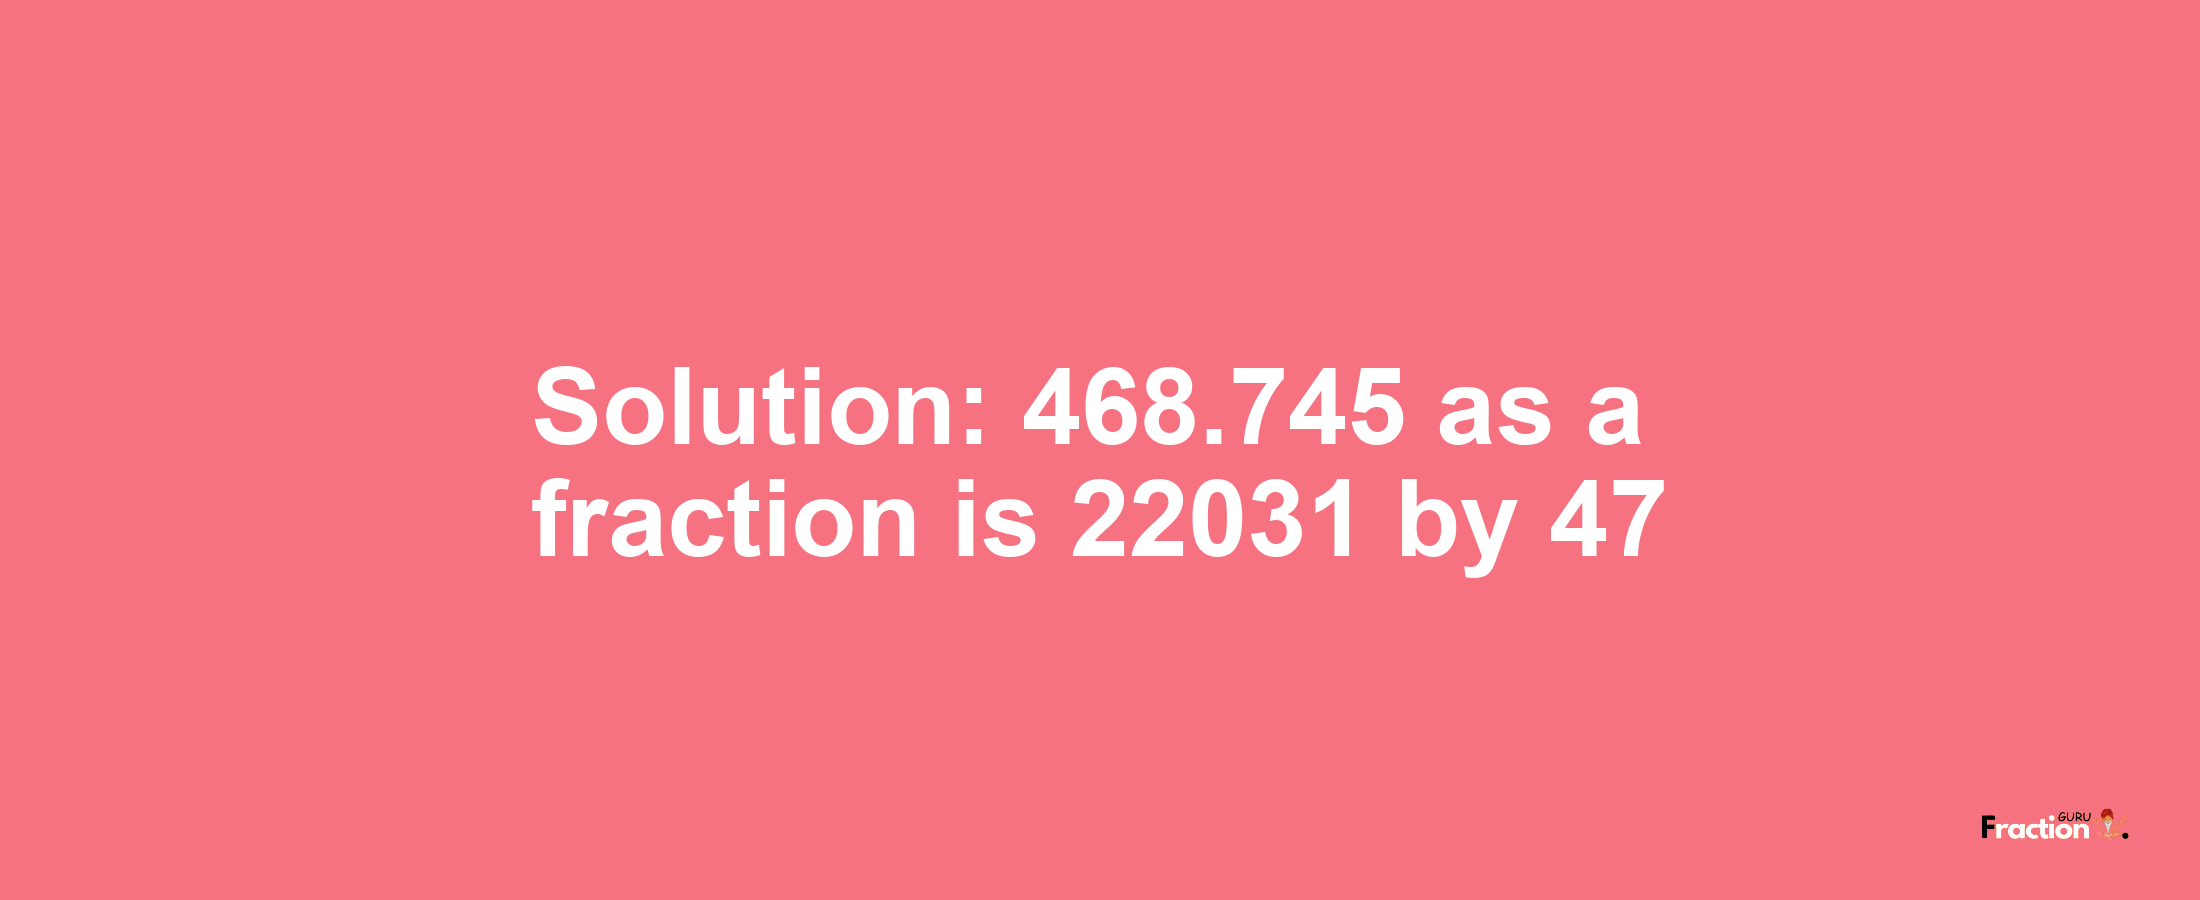 Solution:468.745 as a fraction is 22031/47